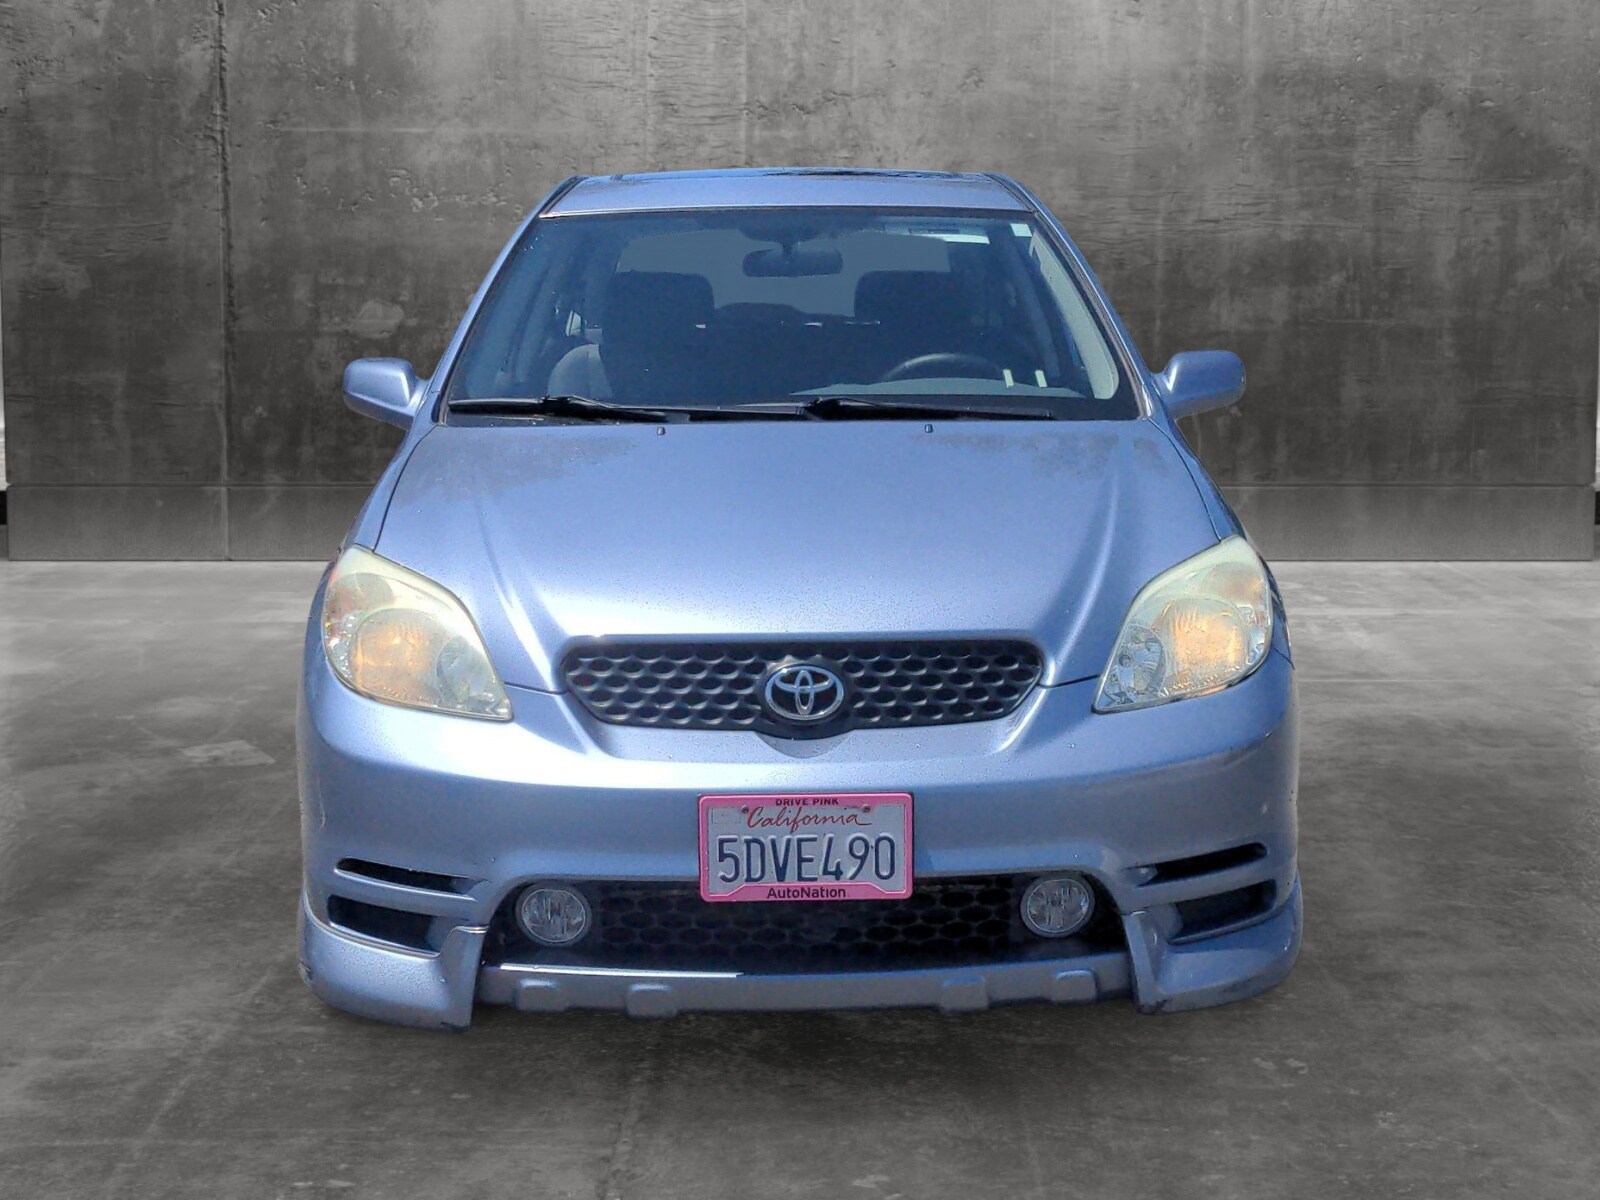 Used 2004 Toyota Matrix XR with VIN 2T1KR32E94C193754 for sale in Fremont, CA